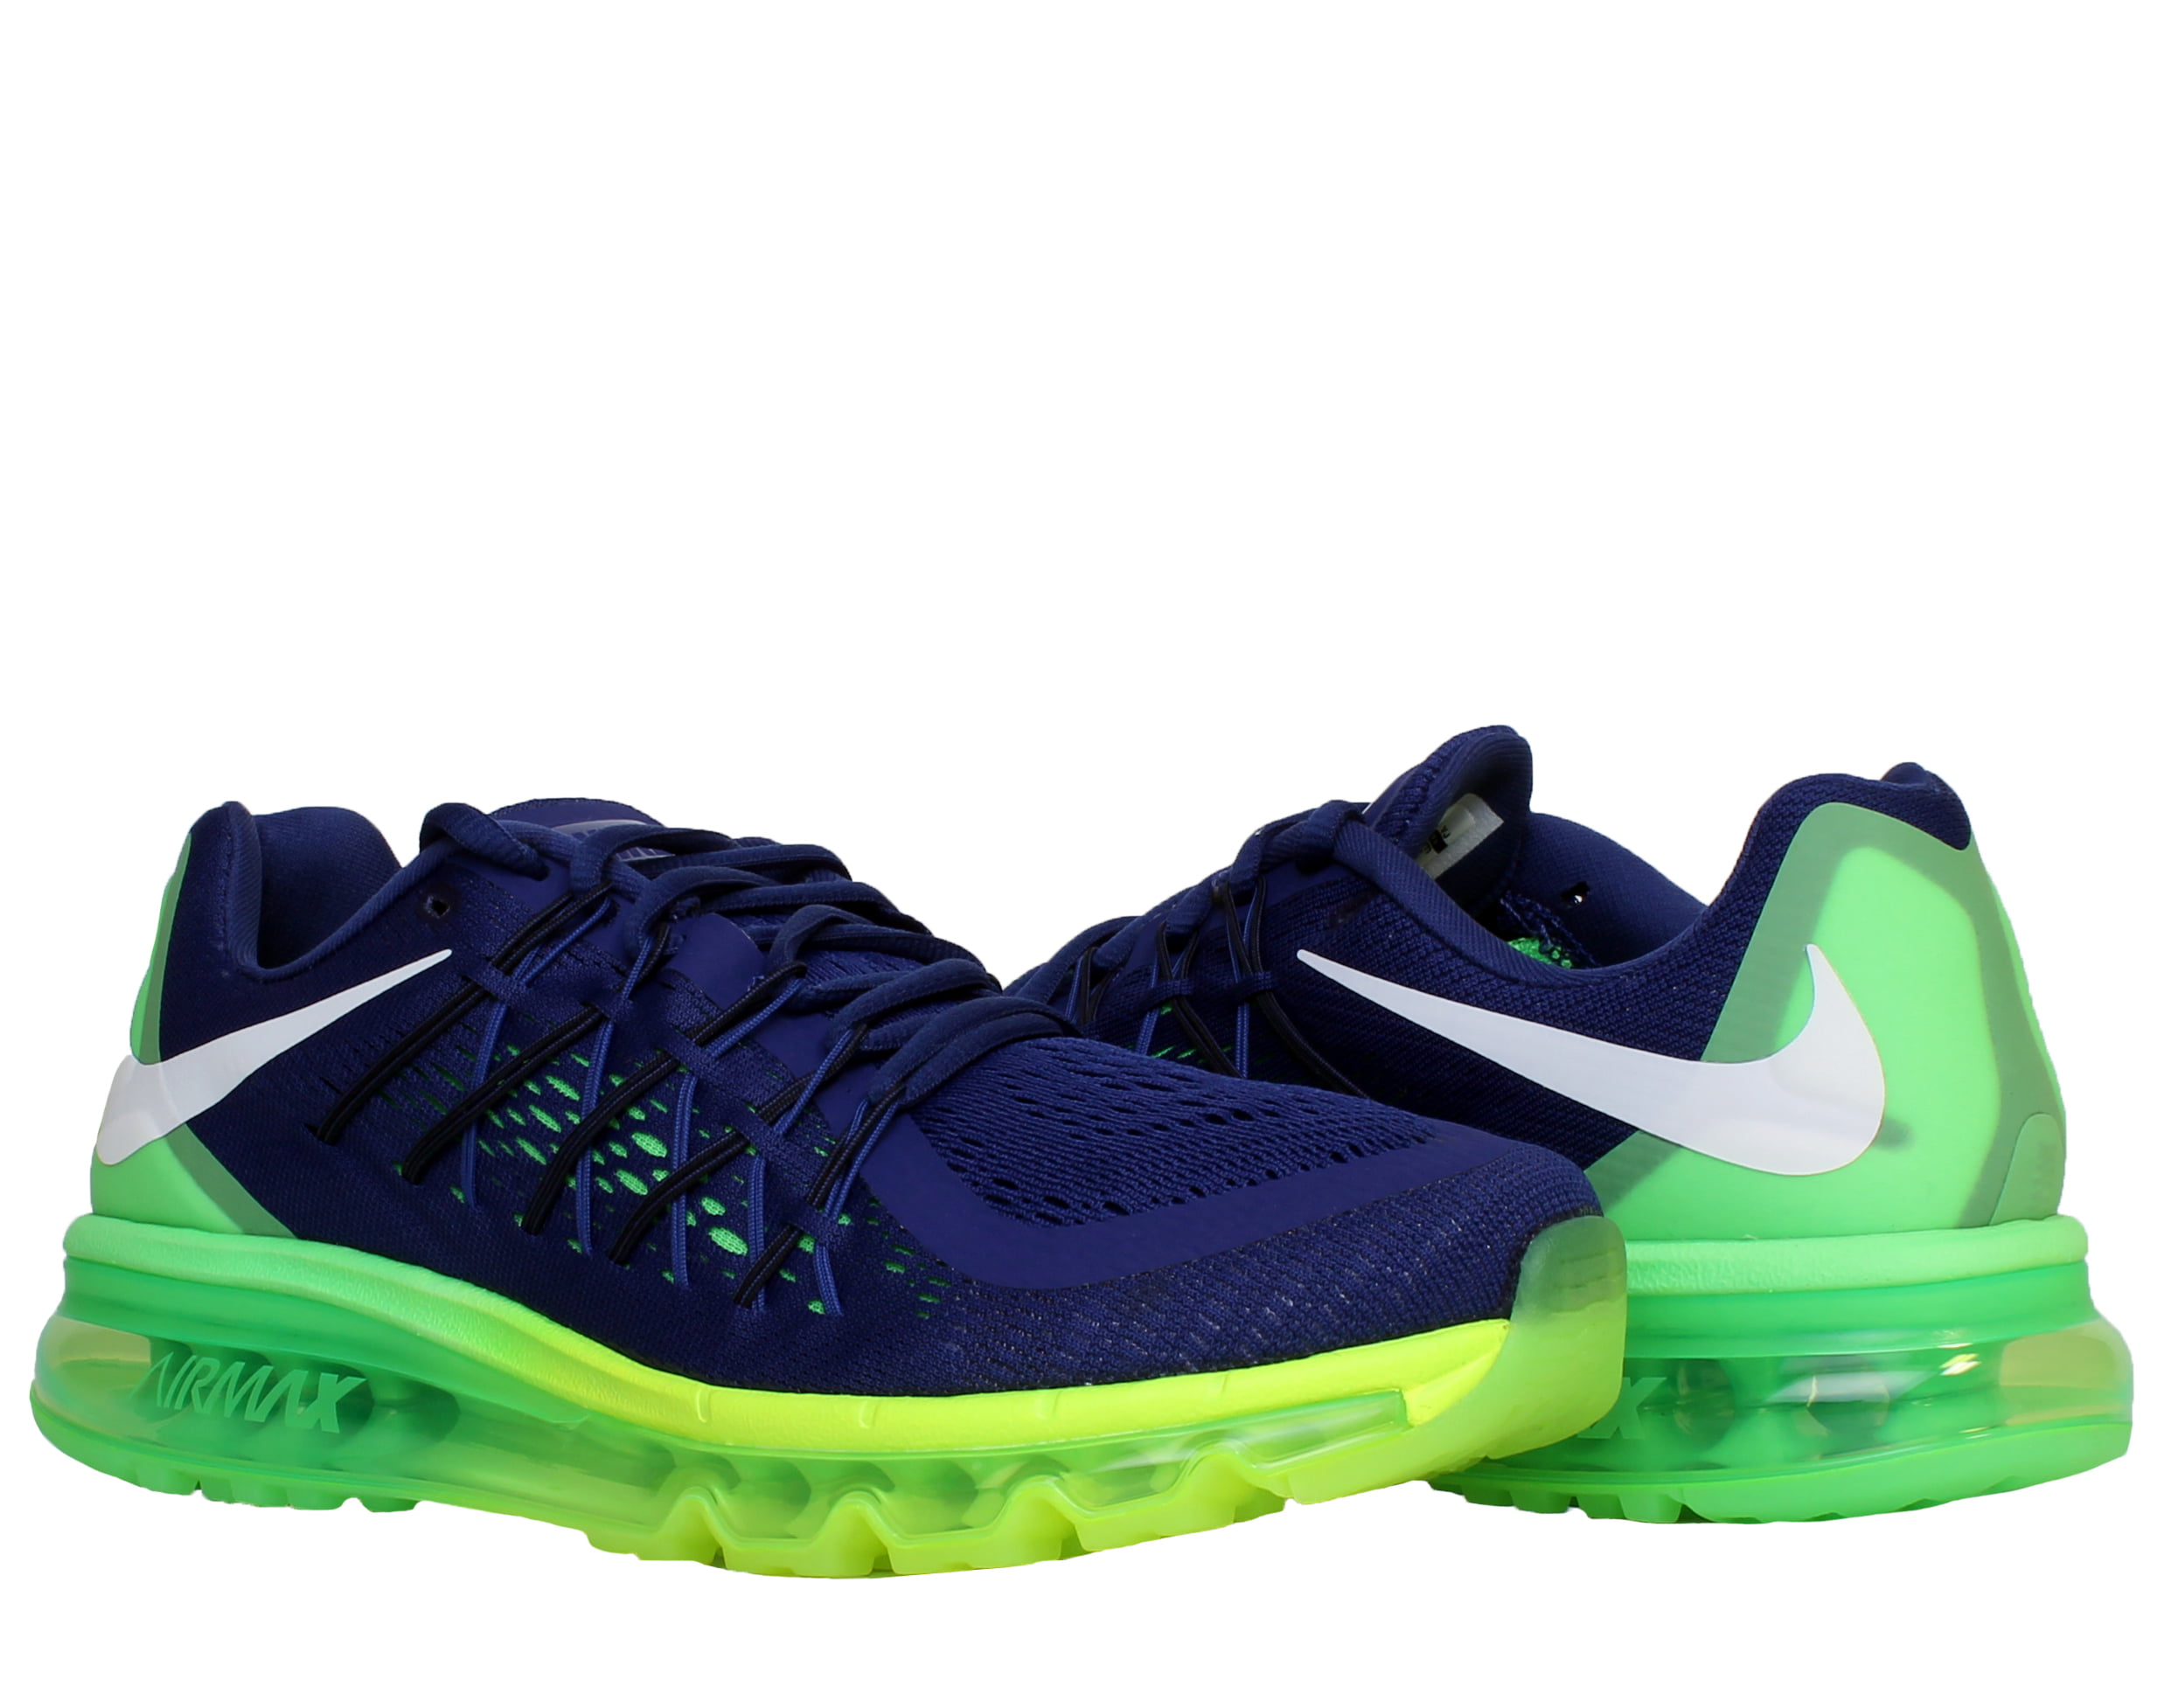 Nike Air Max 2015 Blue/Green Men's Running Shoes 698902-407 Size 9.5 ...